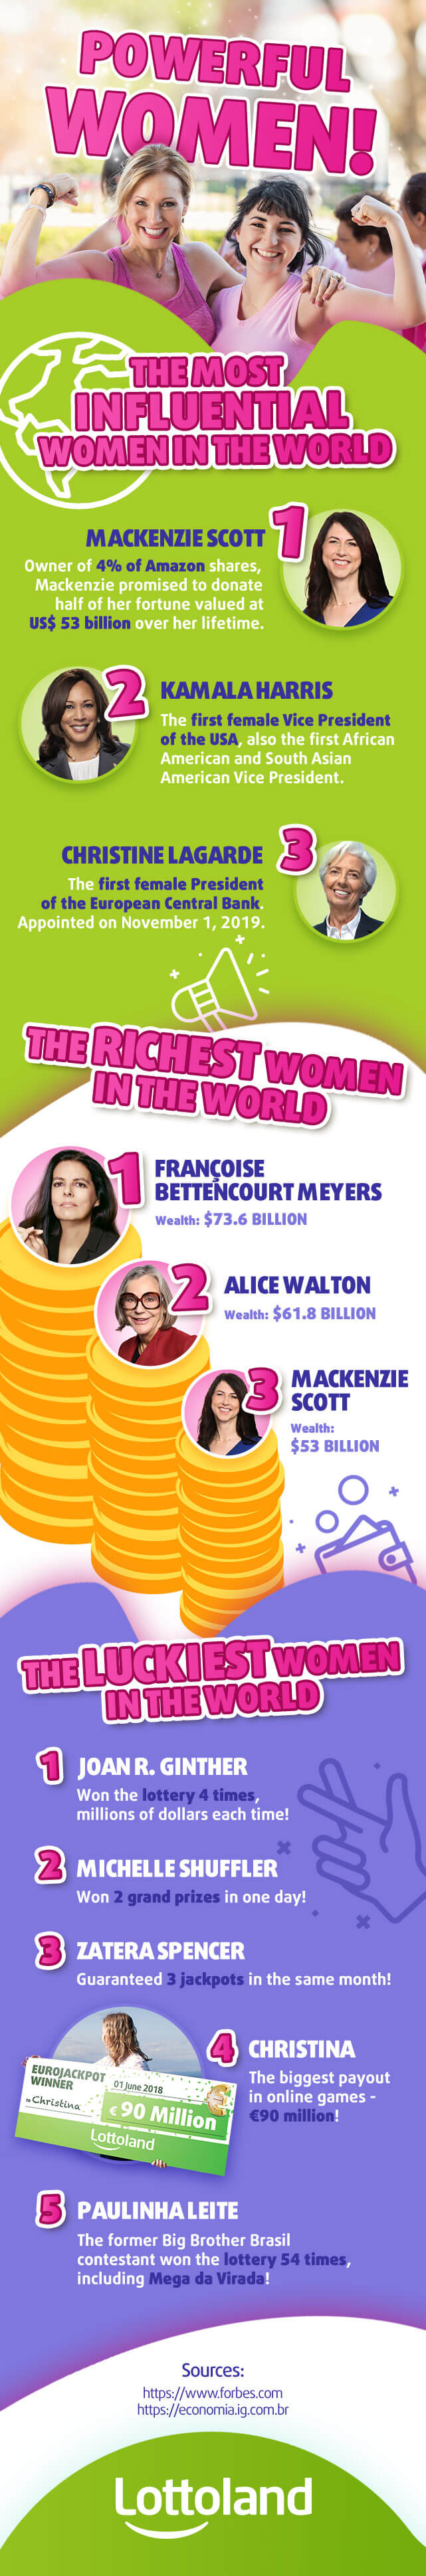 Infographic showing the most powerful, richest and luckiest women in the world for IWD